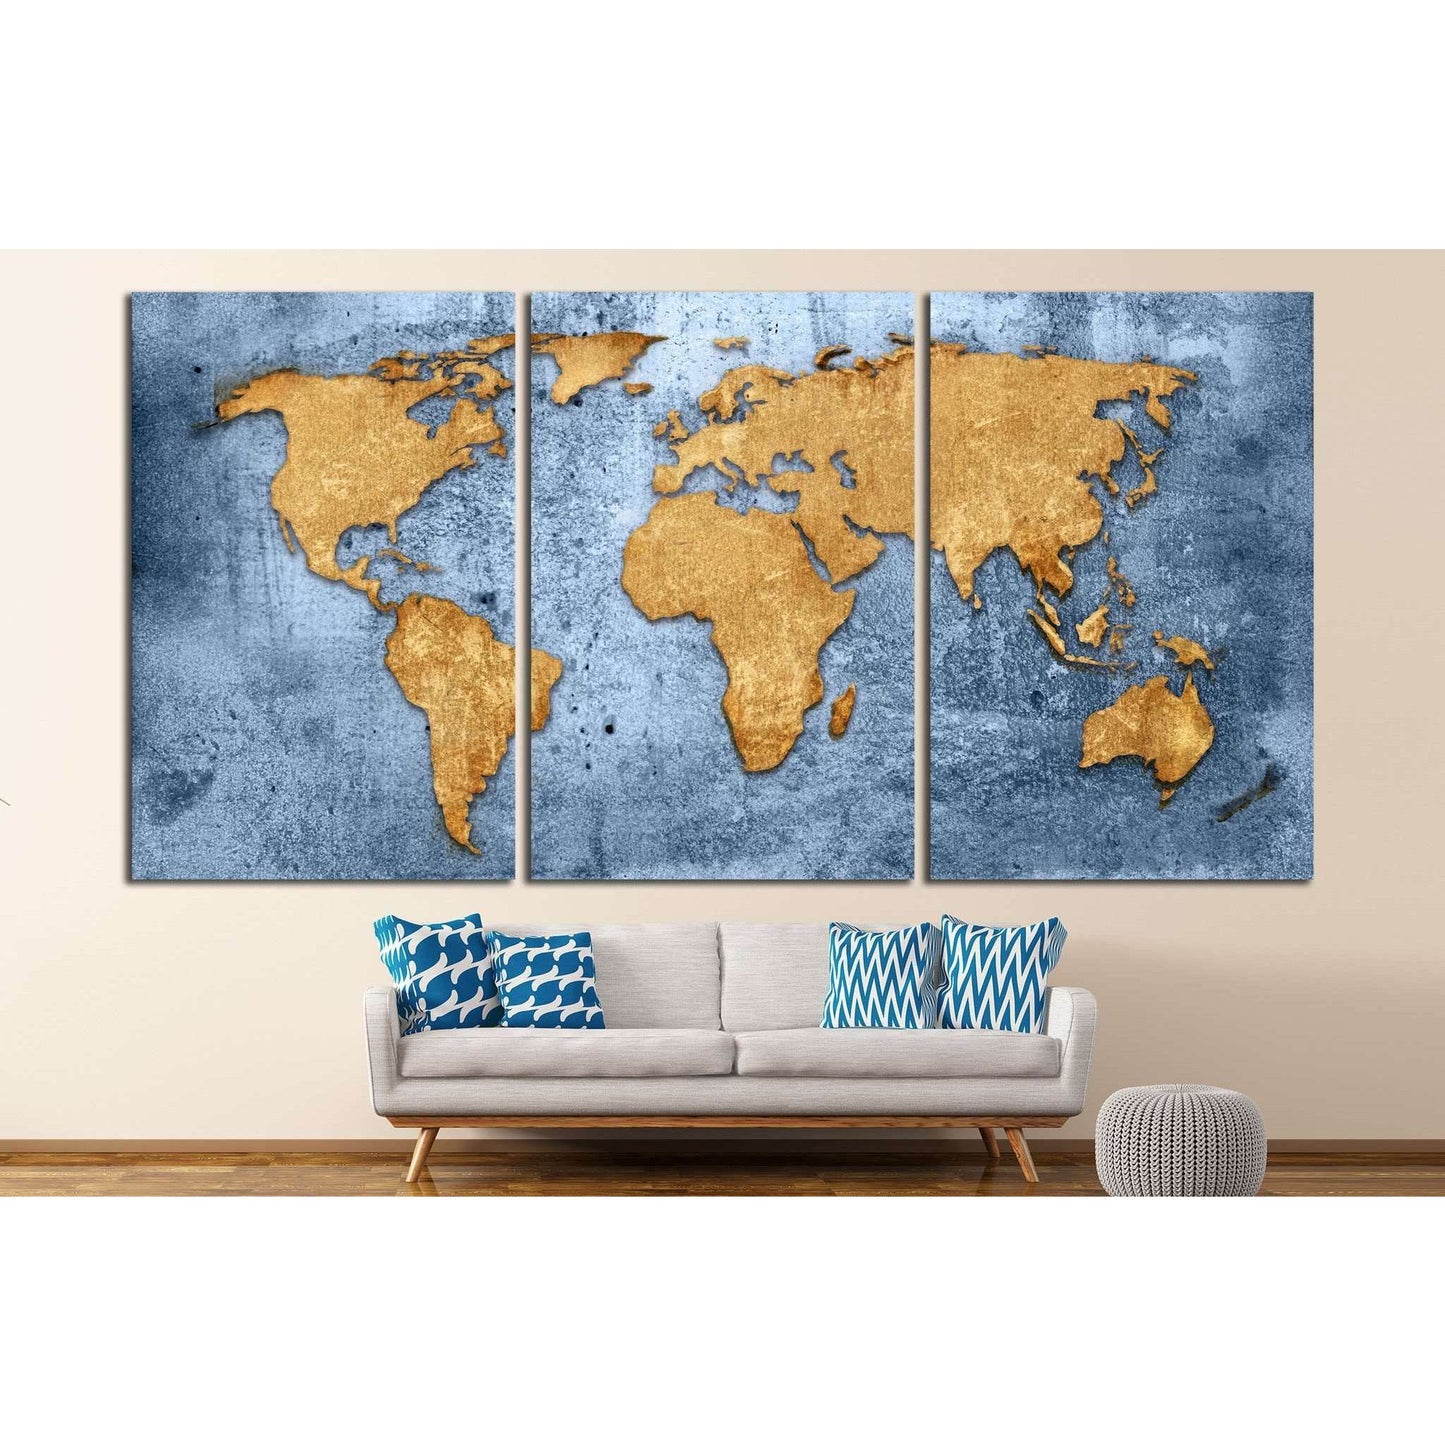 Navy Grunge World Map Canvas PrintDecorate your walls with a stunning Grunge World Map Canvas Art Print from the world's largest art gallery. Choose from thousands of Grunge Map artworks with various sizing options. Choose your perfect art print to comple